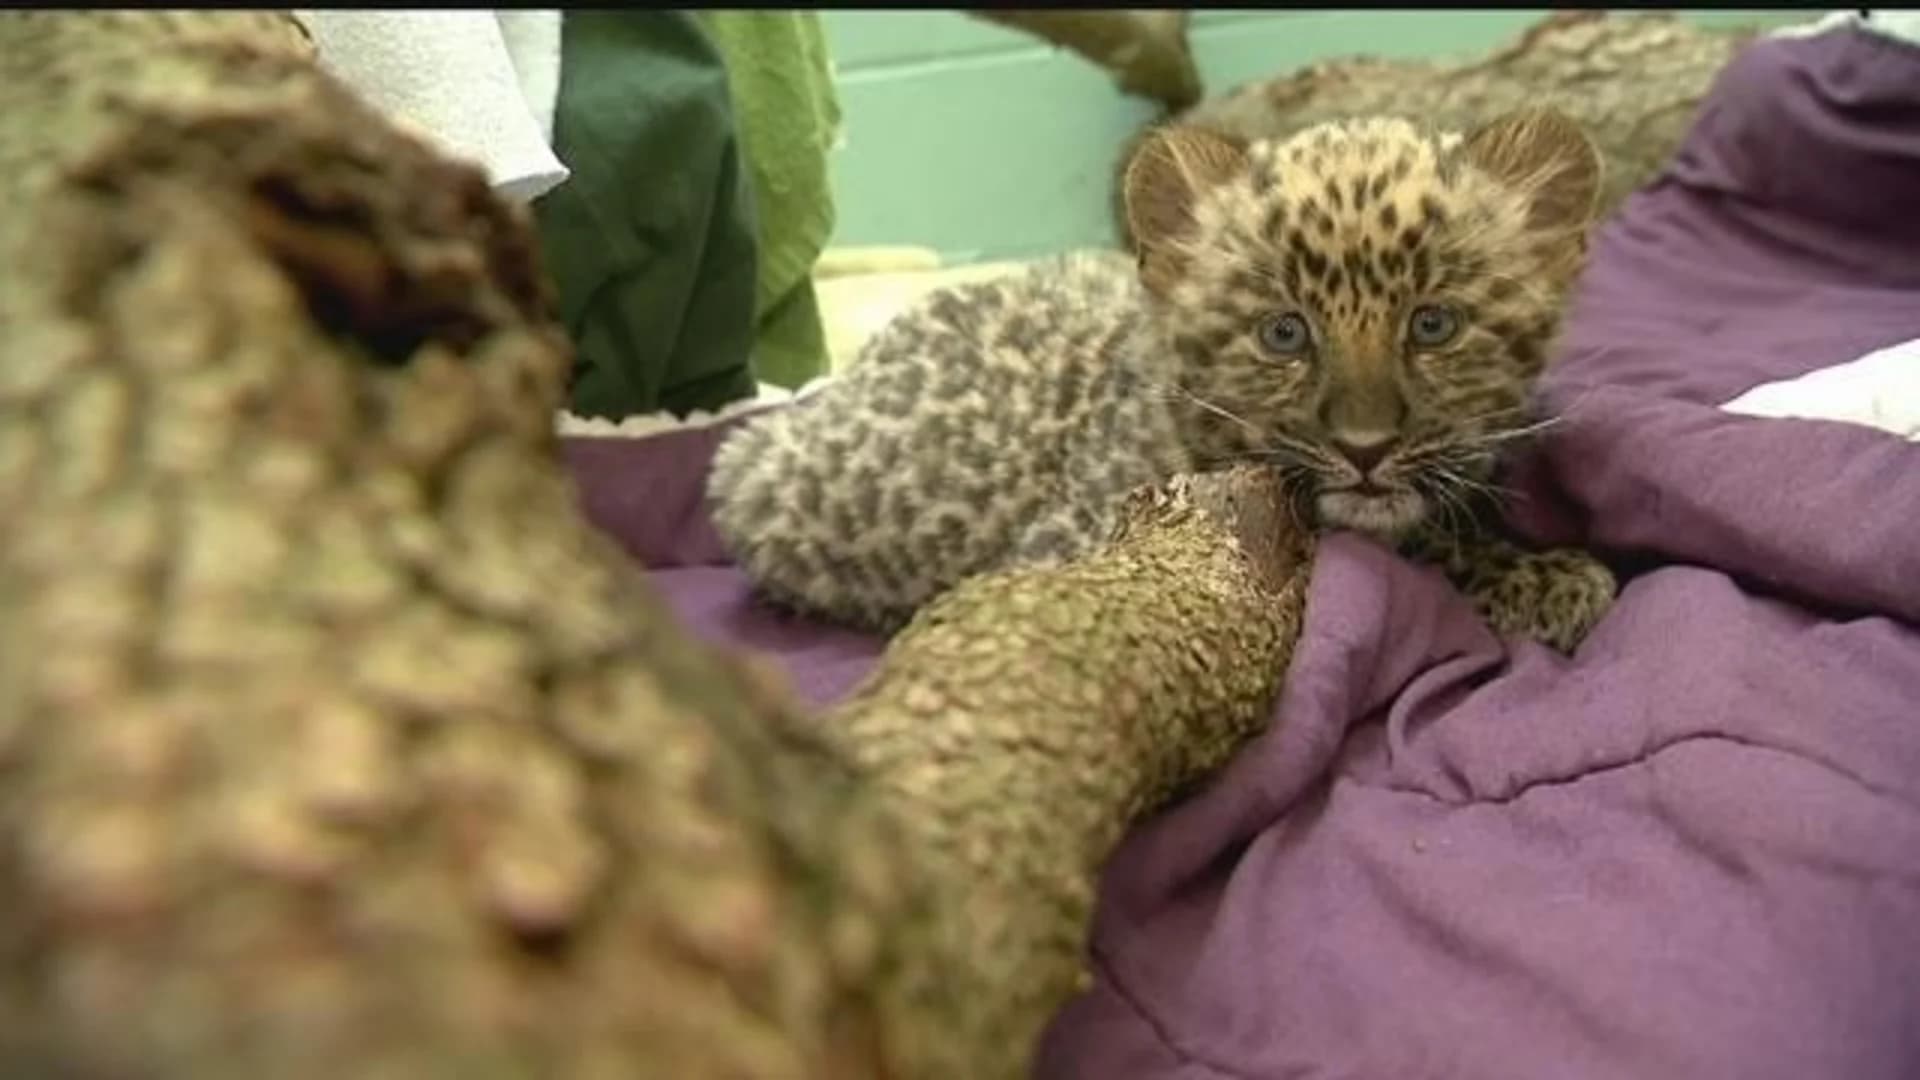 Seeing spots: CT's Beardsley Zoo welcomes rare leopard cubs